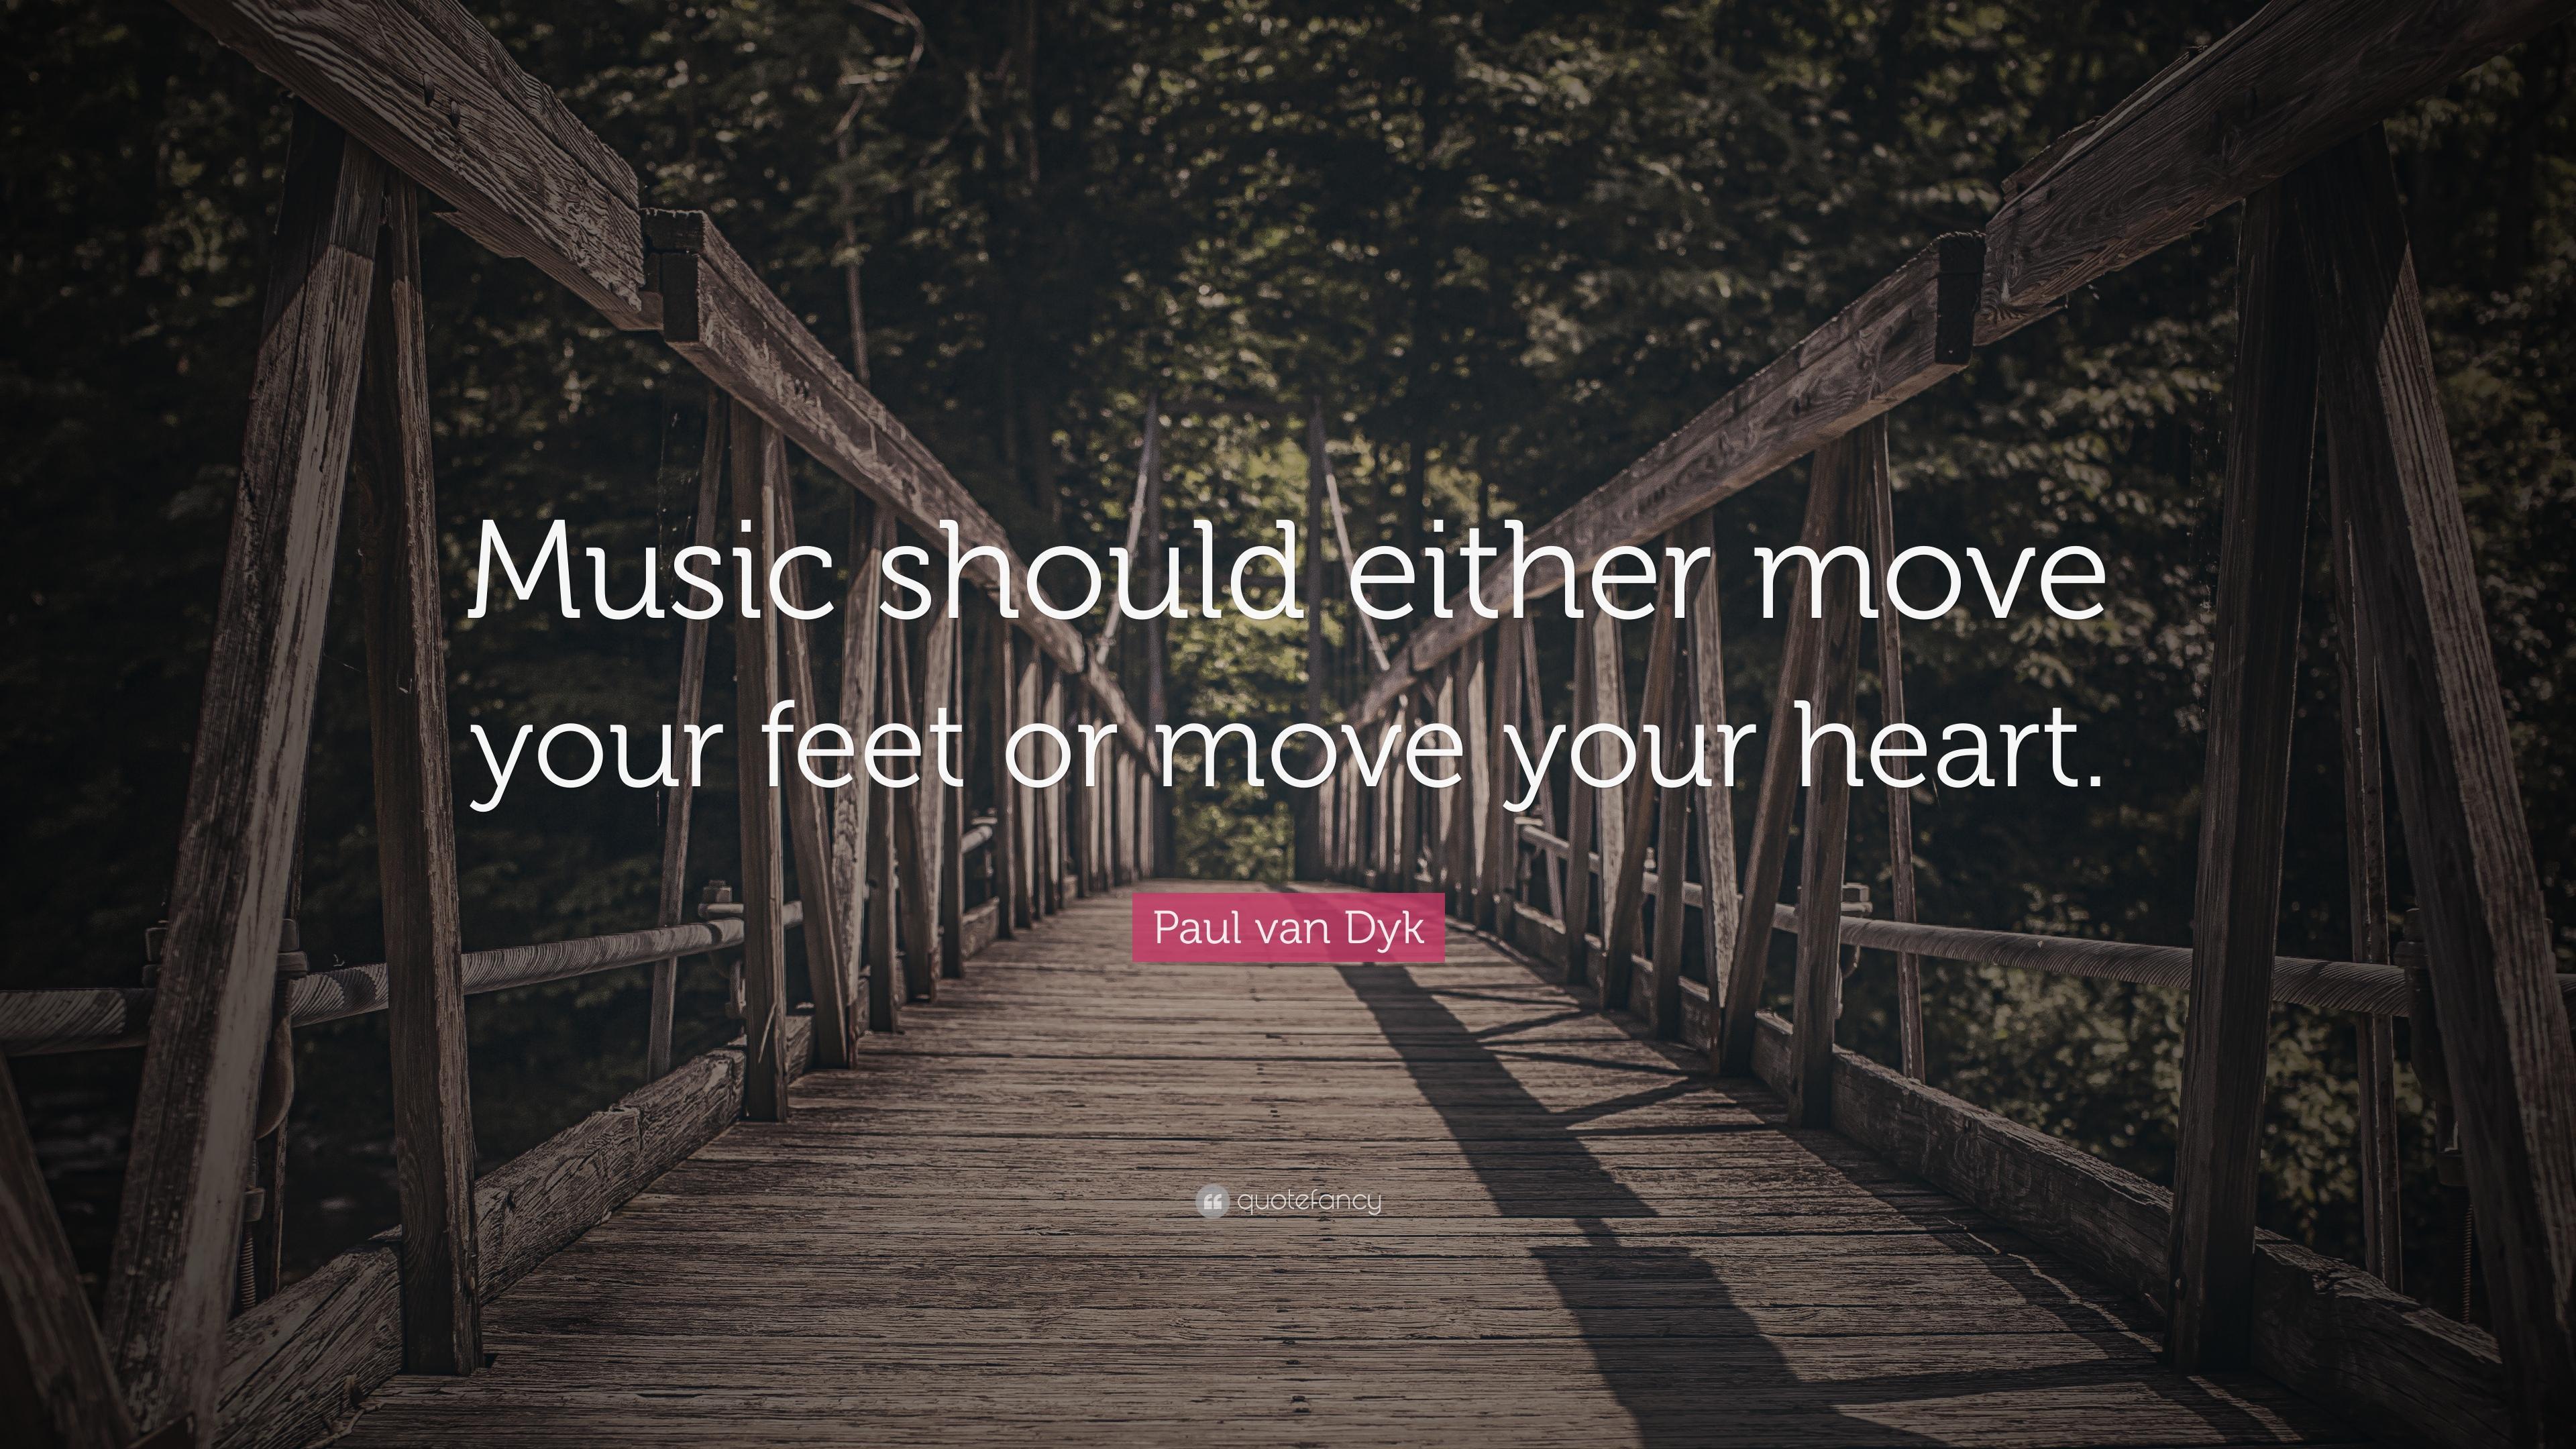 Paul van Dyk Quote: “Music should either move your feet or move your